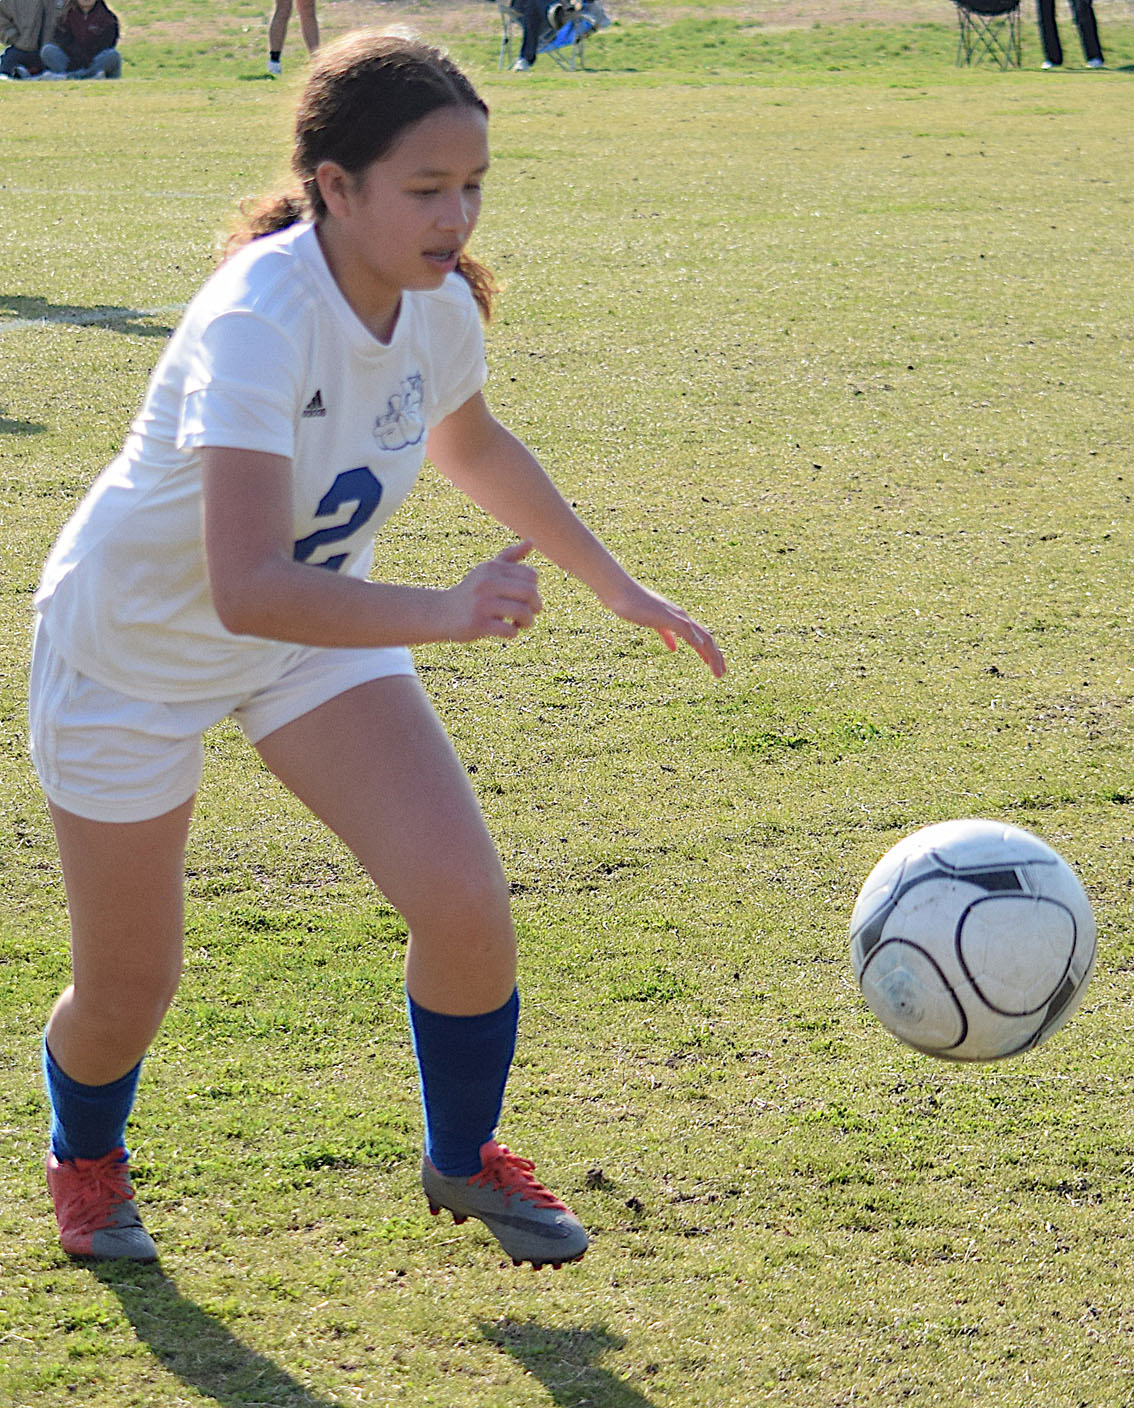 Decatur soccer teams played busy schedule